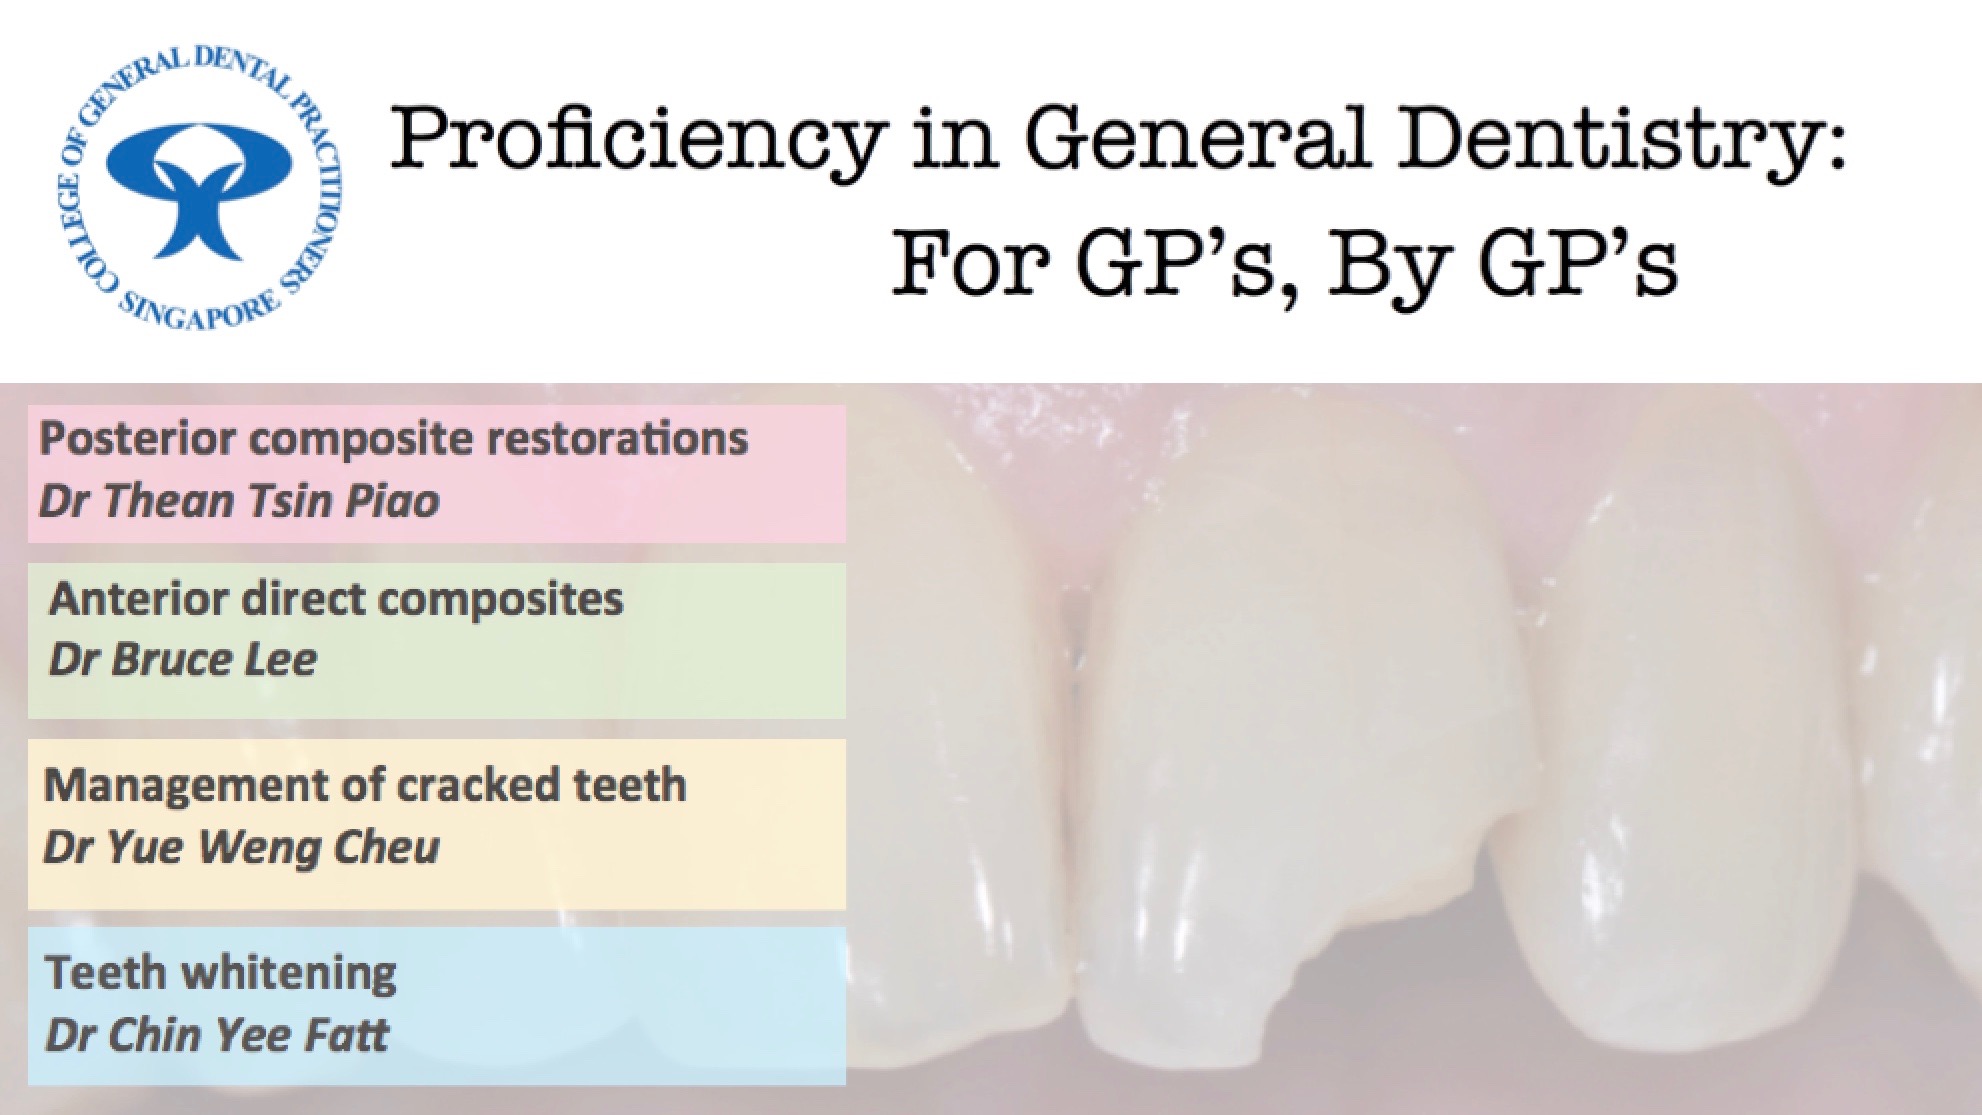 Proficiency in General Dentistry: For GP’s, By GP’s